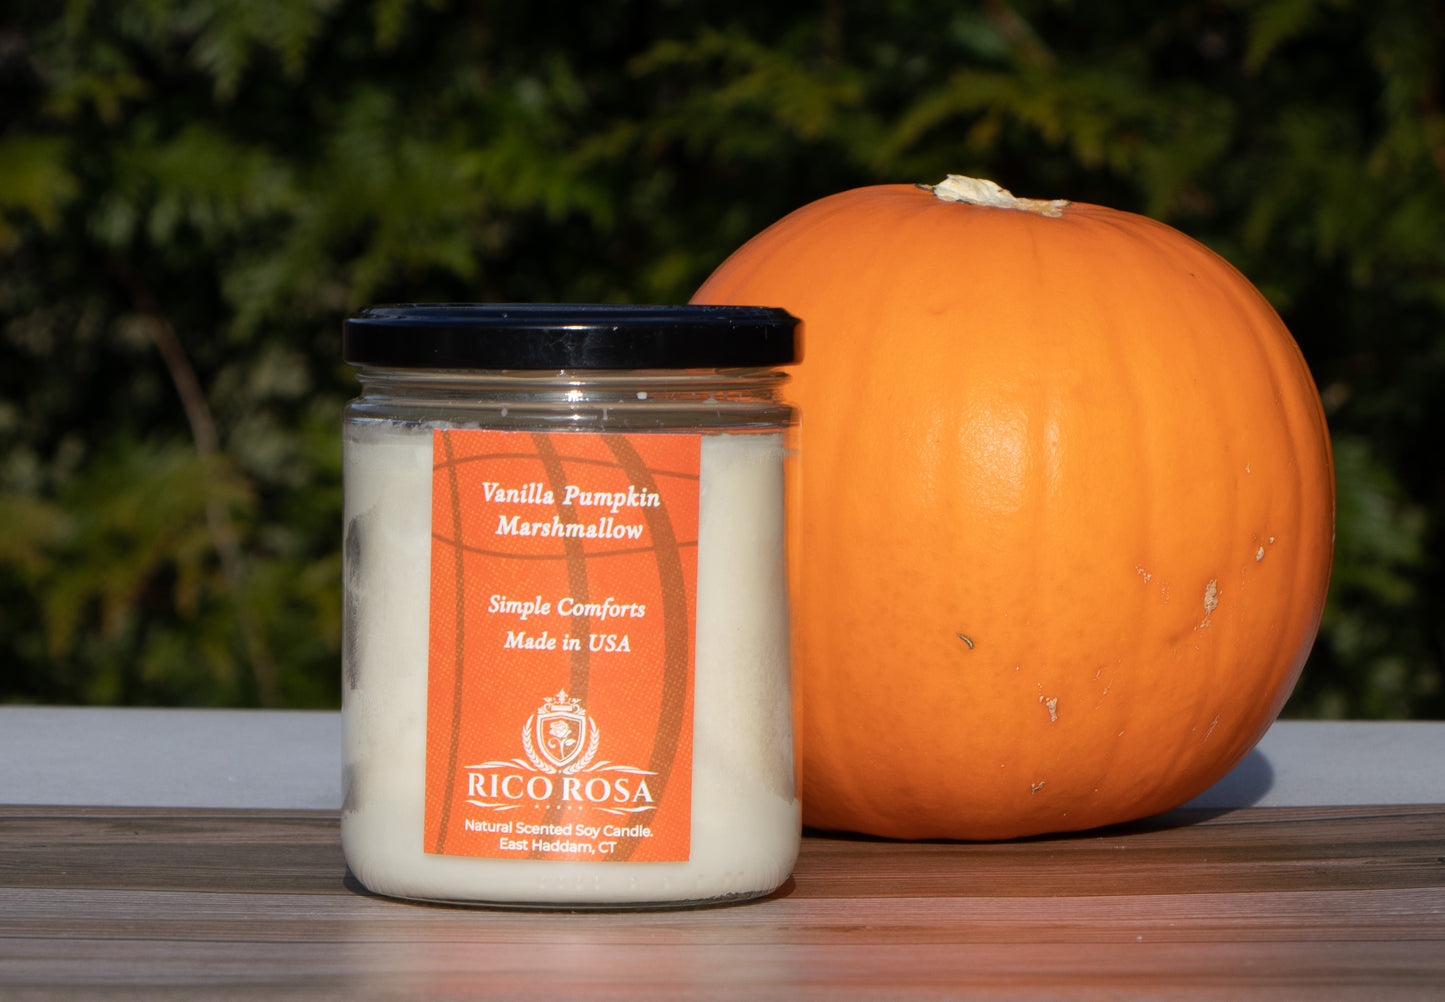 Vanilla Pumpkin Marshmallow Natural Scented Soy Candle